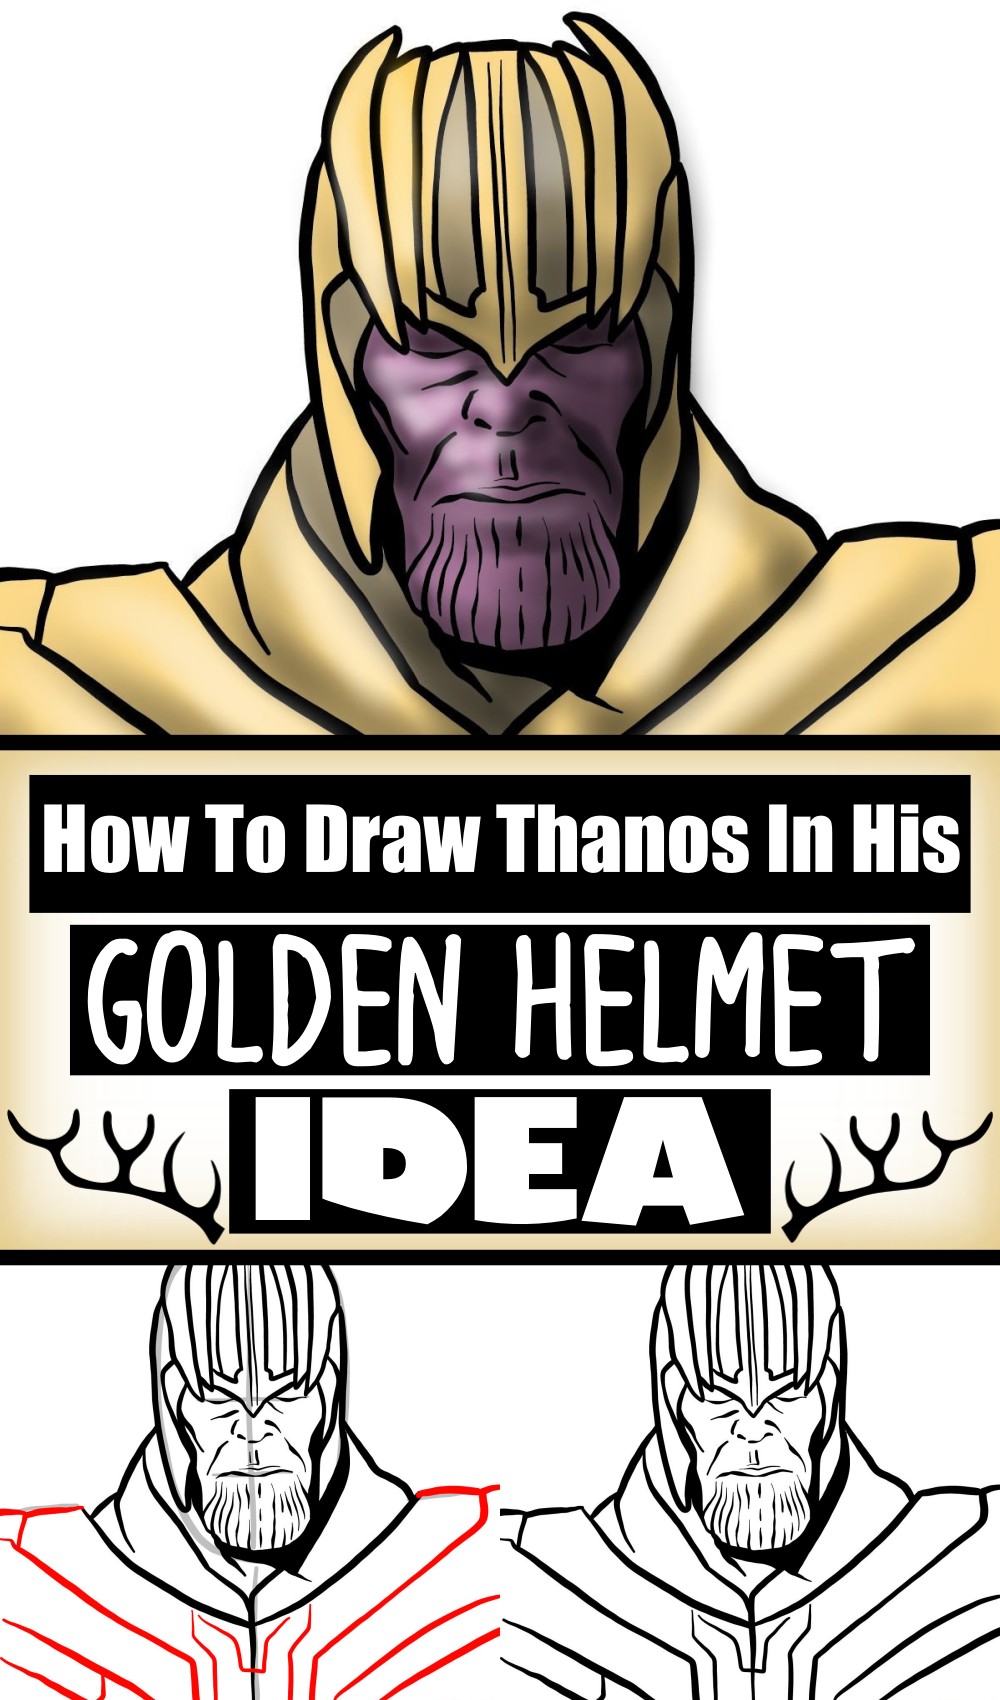 How To Draw Thanos In His Golden Helmet